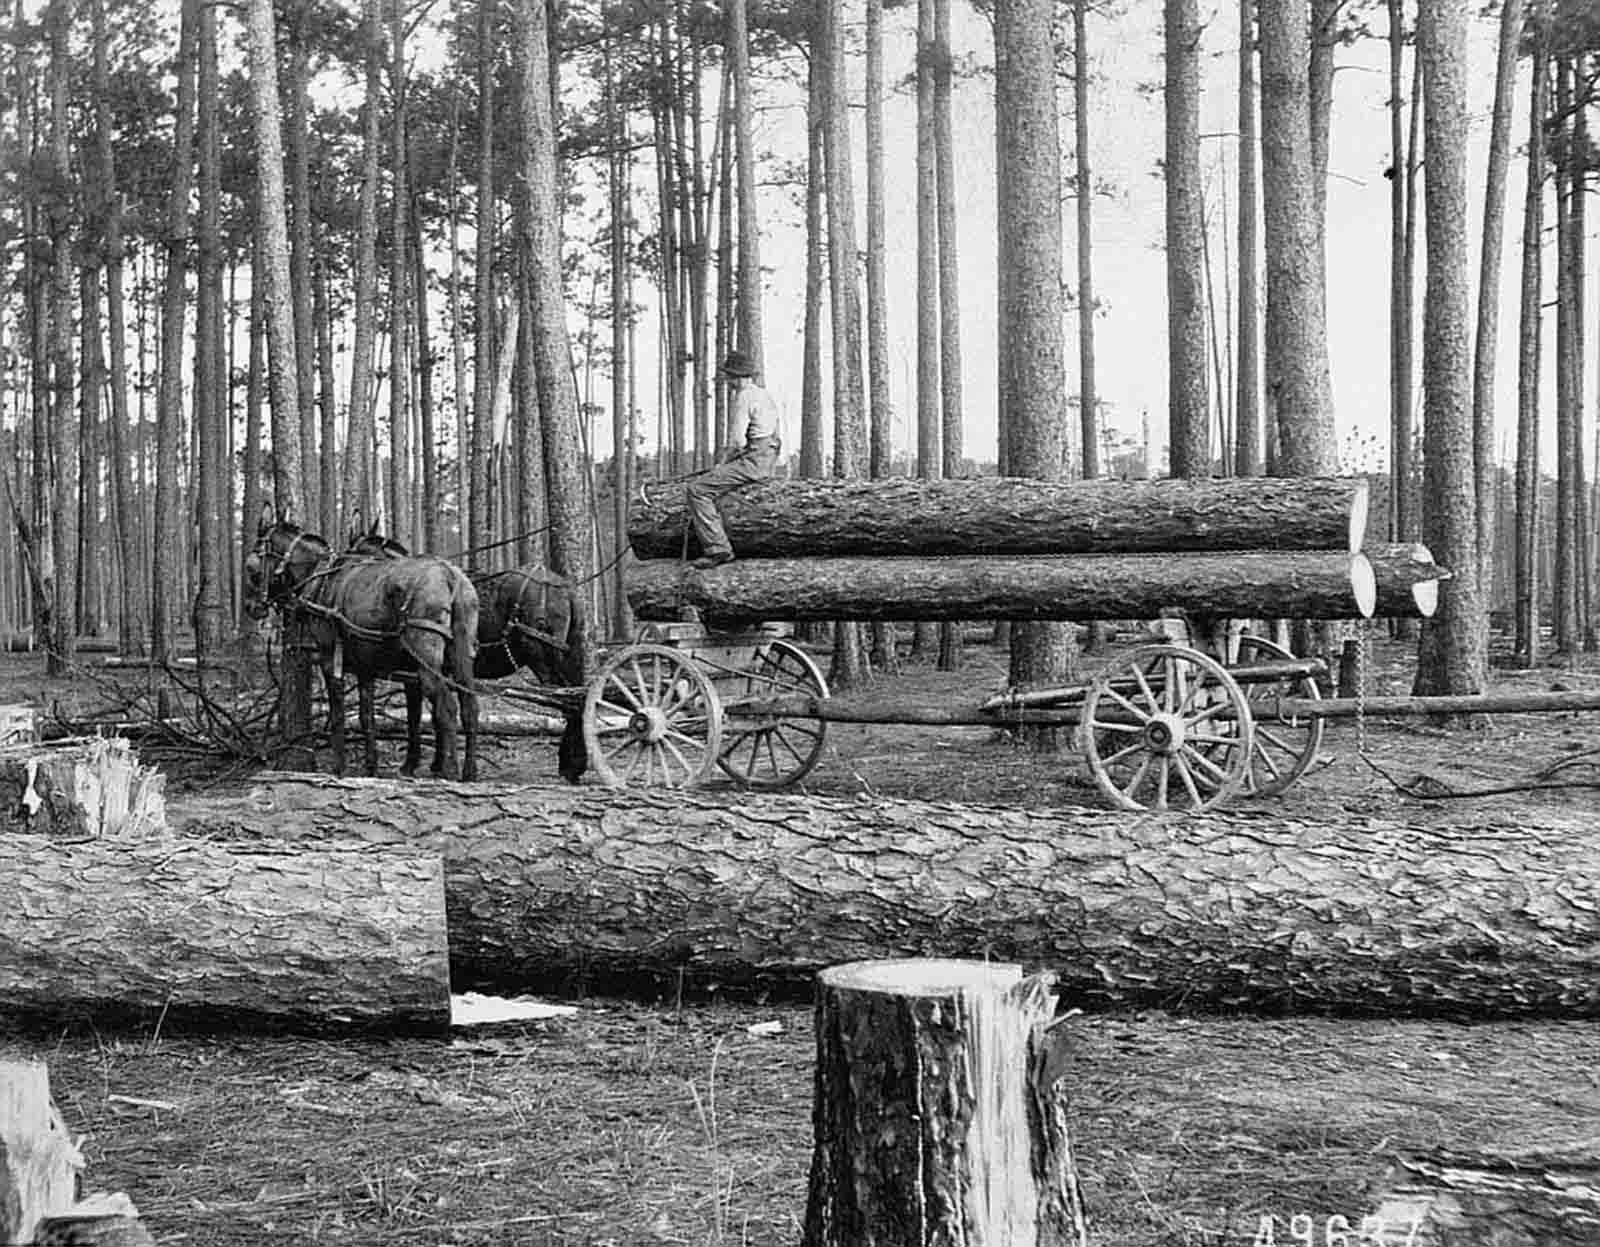 Stunning Historical Photos of Lumberjacks who Fell Giant Trees with Axes and Handsaws from the early 1900s